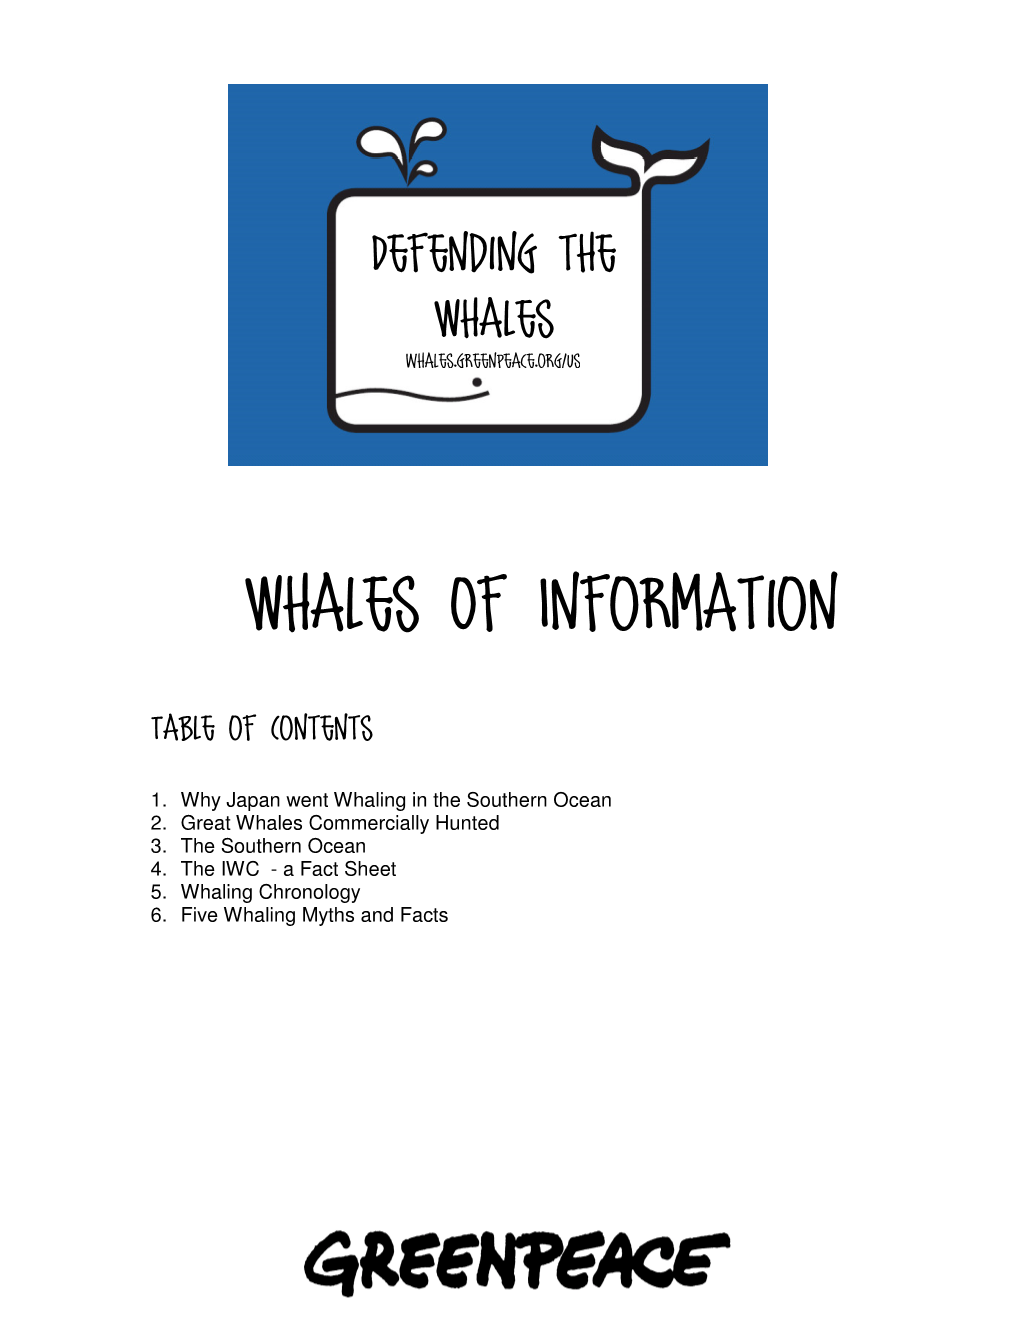 Whales of Information